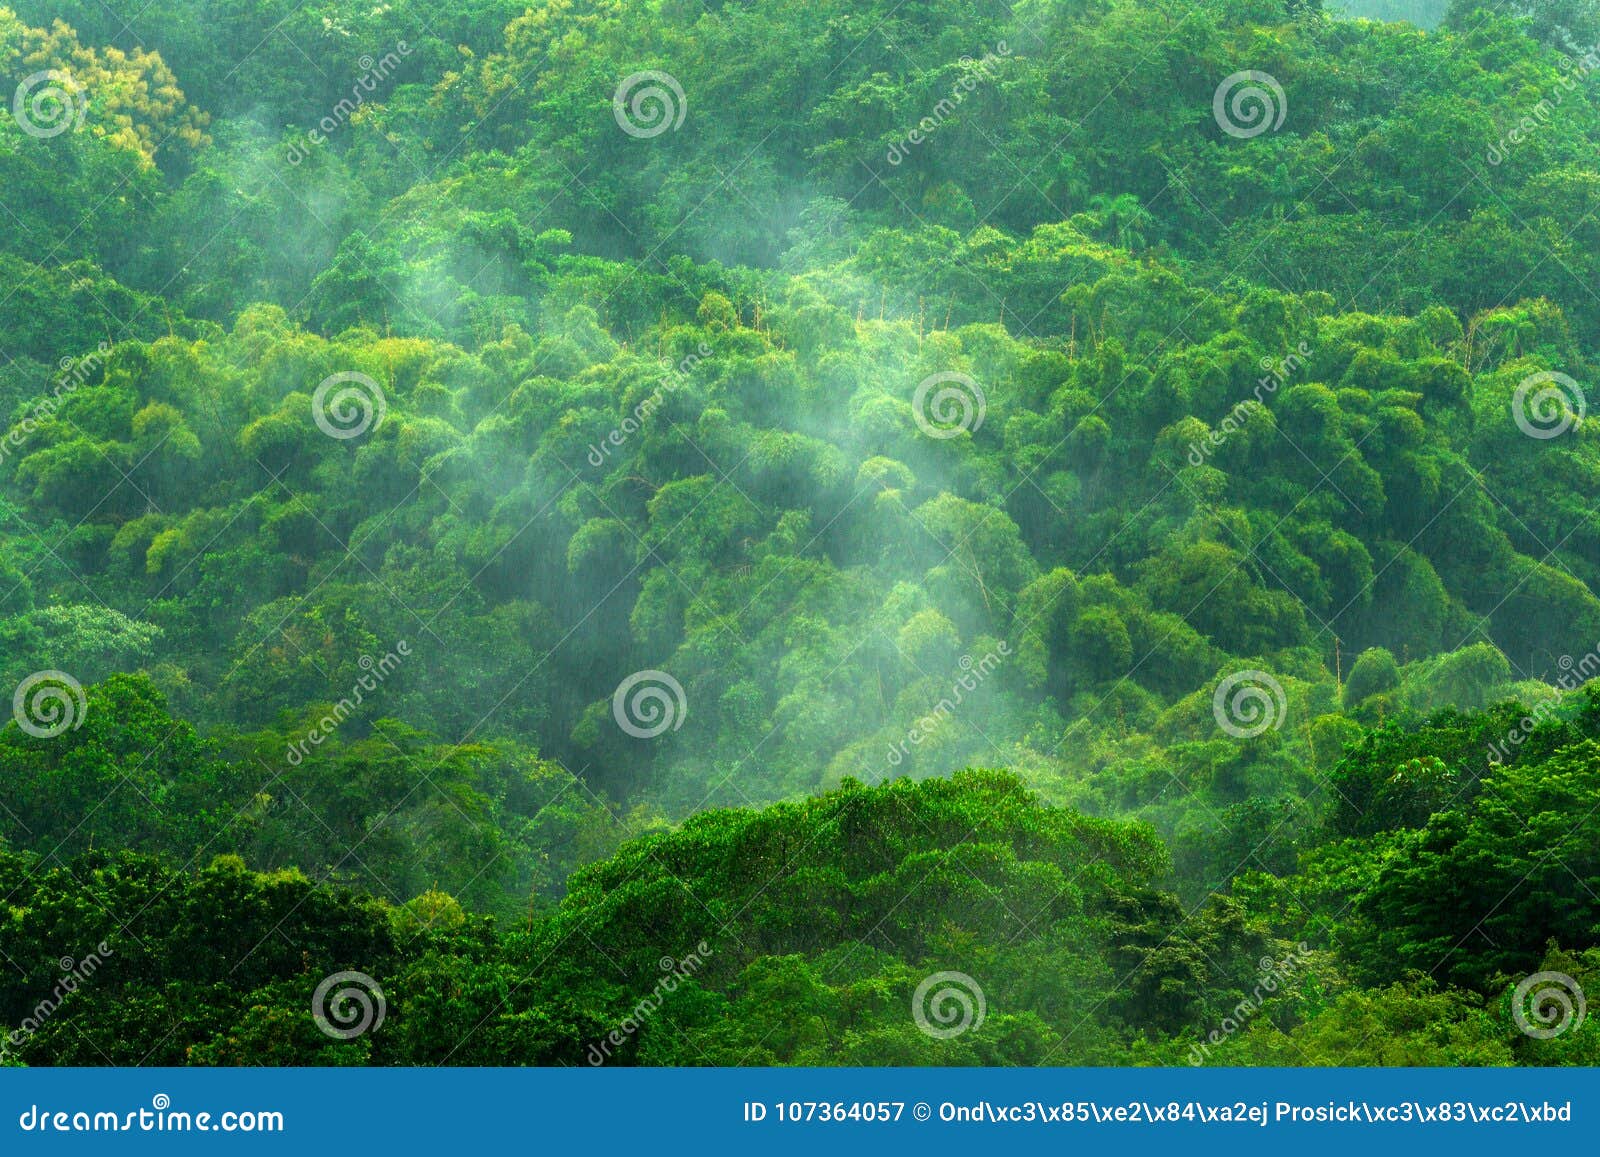 tropic forest during rainy day. green jungle landscape with rain and fog. forest hill with big beautiful tree in santa marta, colo